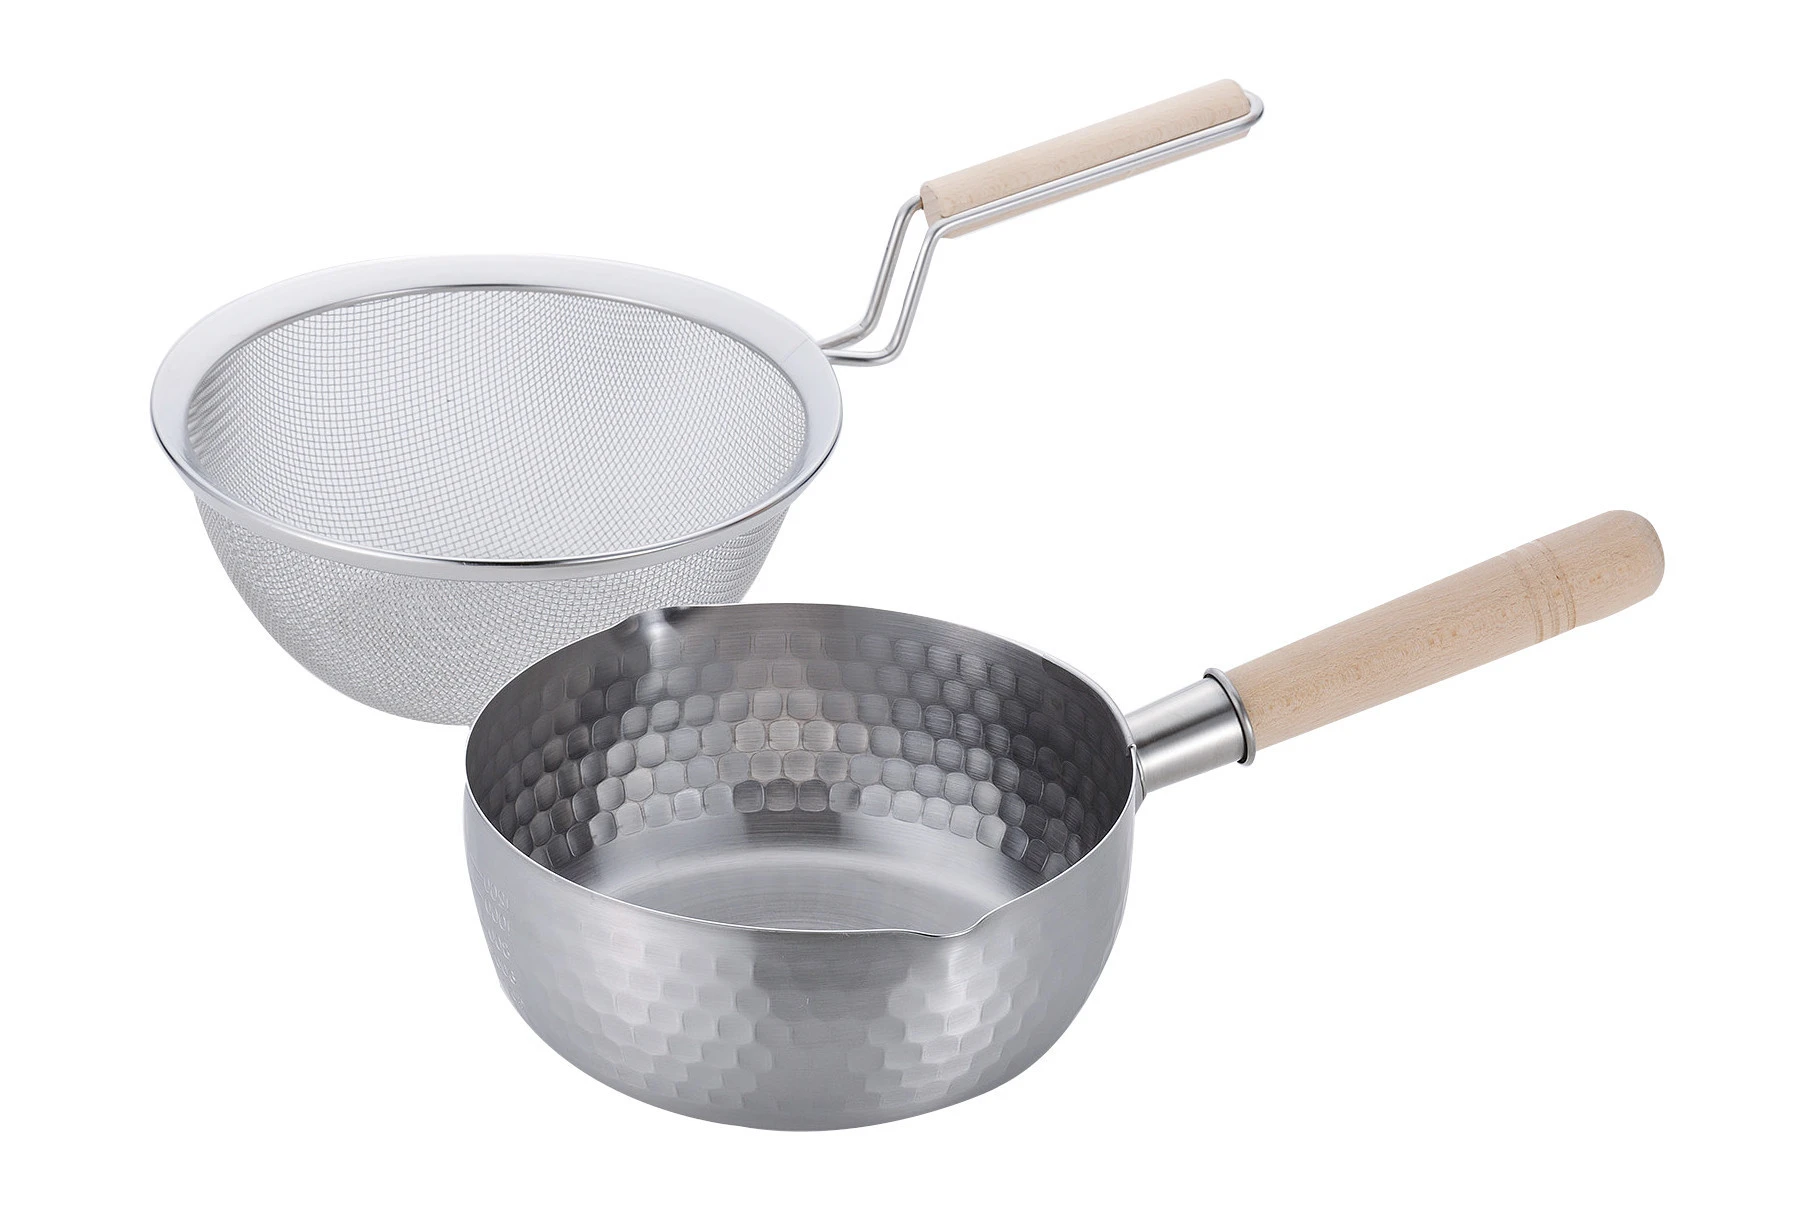 High quality cooking soup stainless steel kitchen pot set for making Japanese soup stock